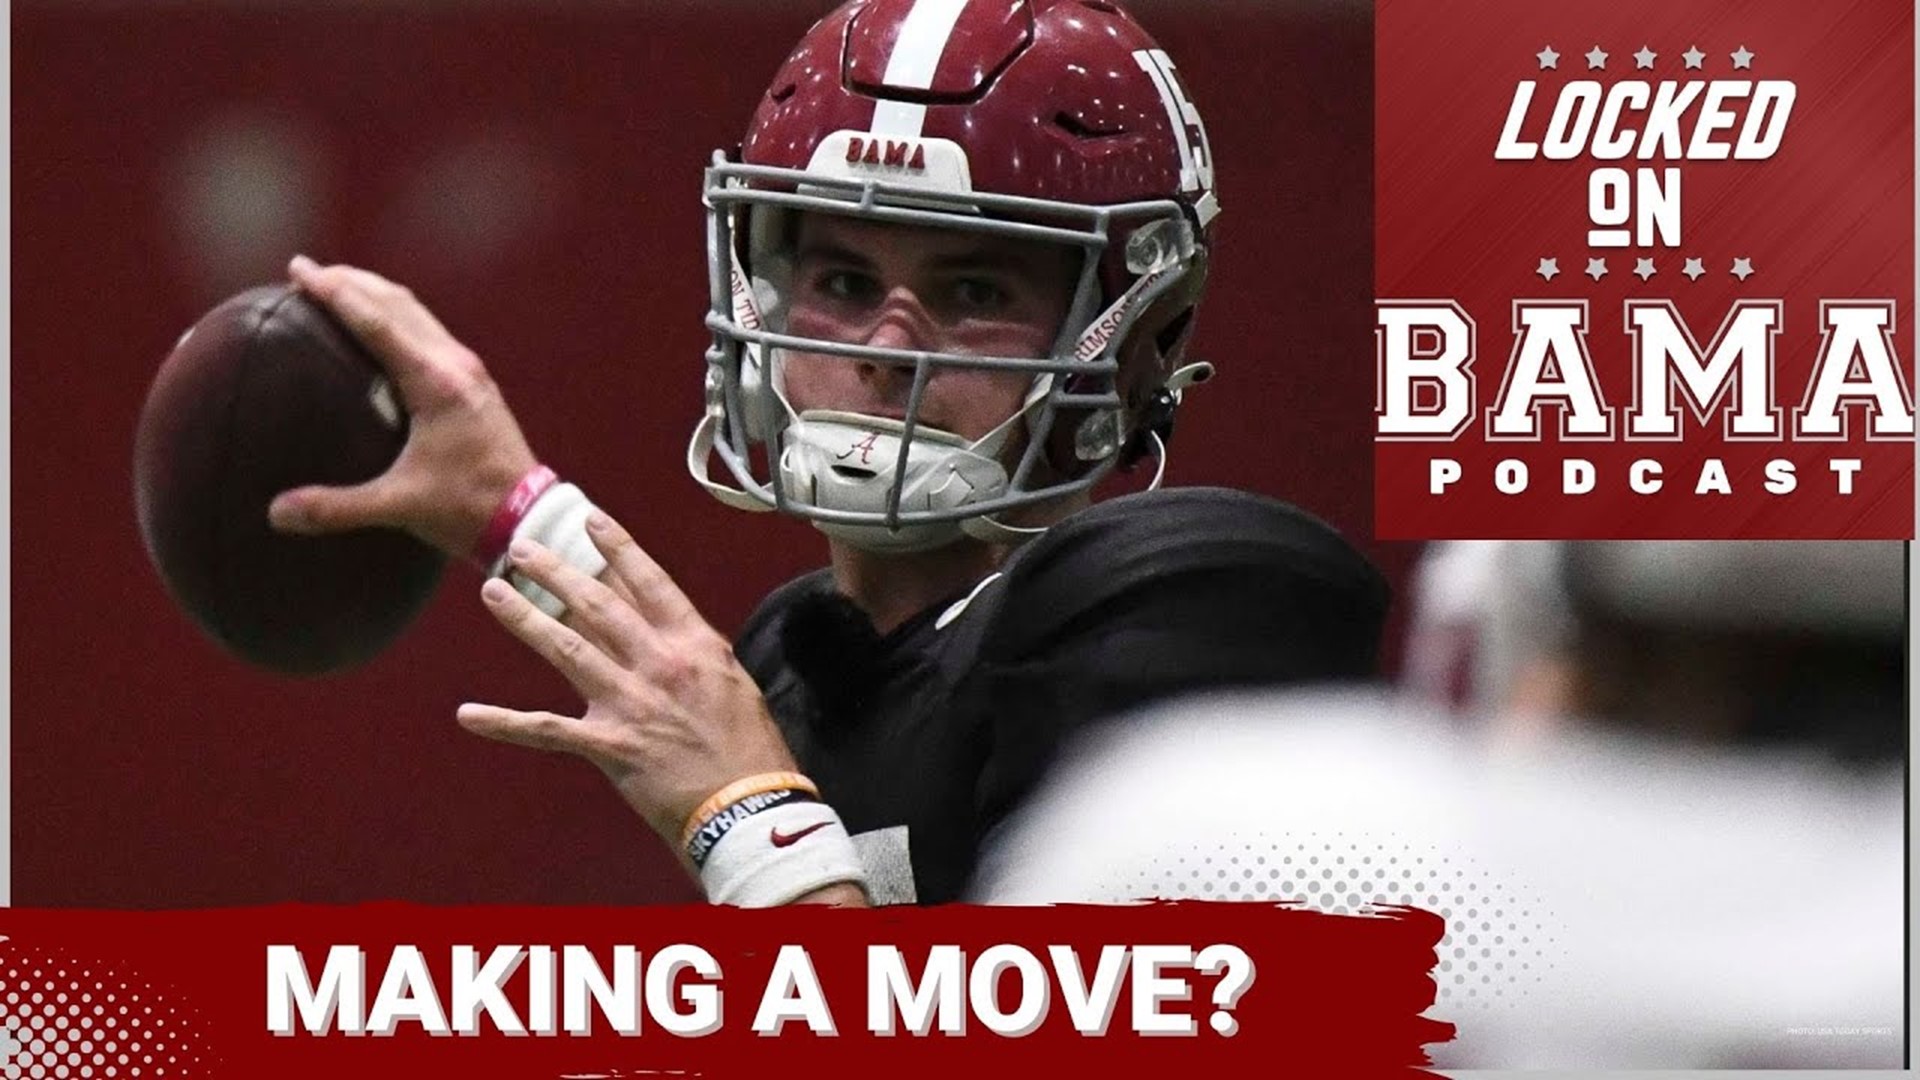 Alabama's A-Day is coming up and could we see some QB movement after this contest? On the depth chart or in the transfer portal?